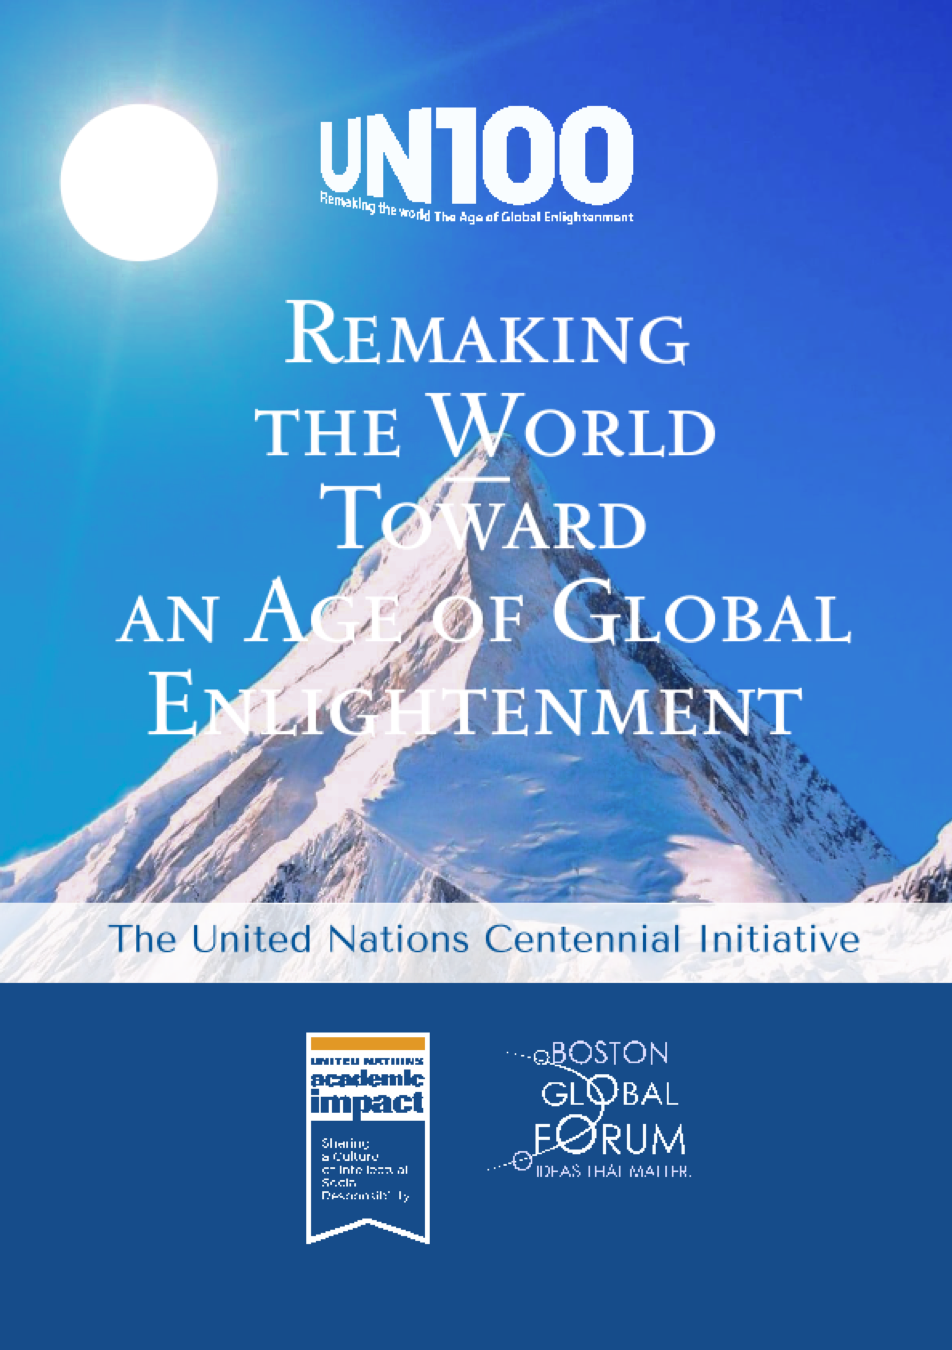 AIWS City Implements “Remaking the World – Toward an Age of Global Enlightenment”